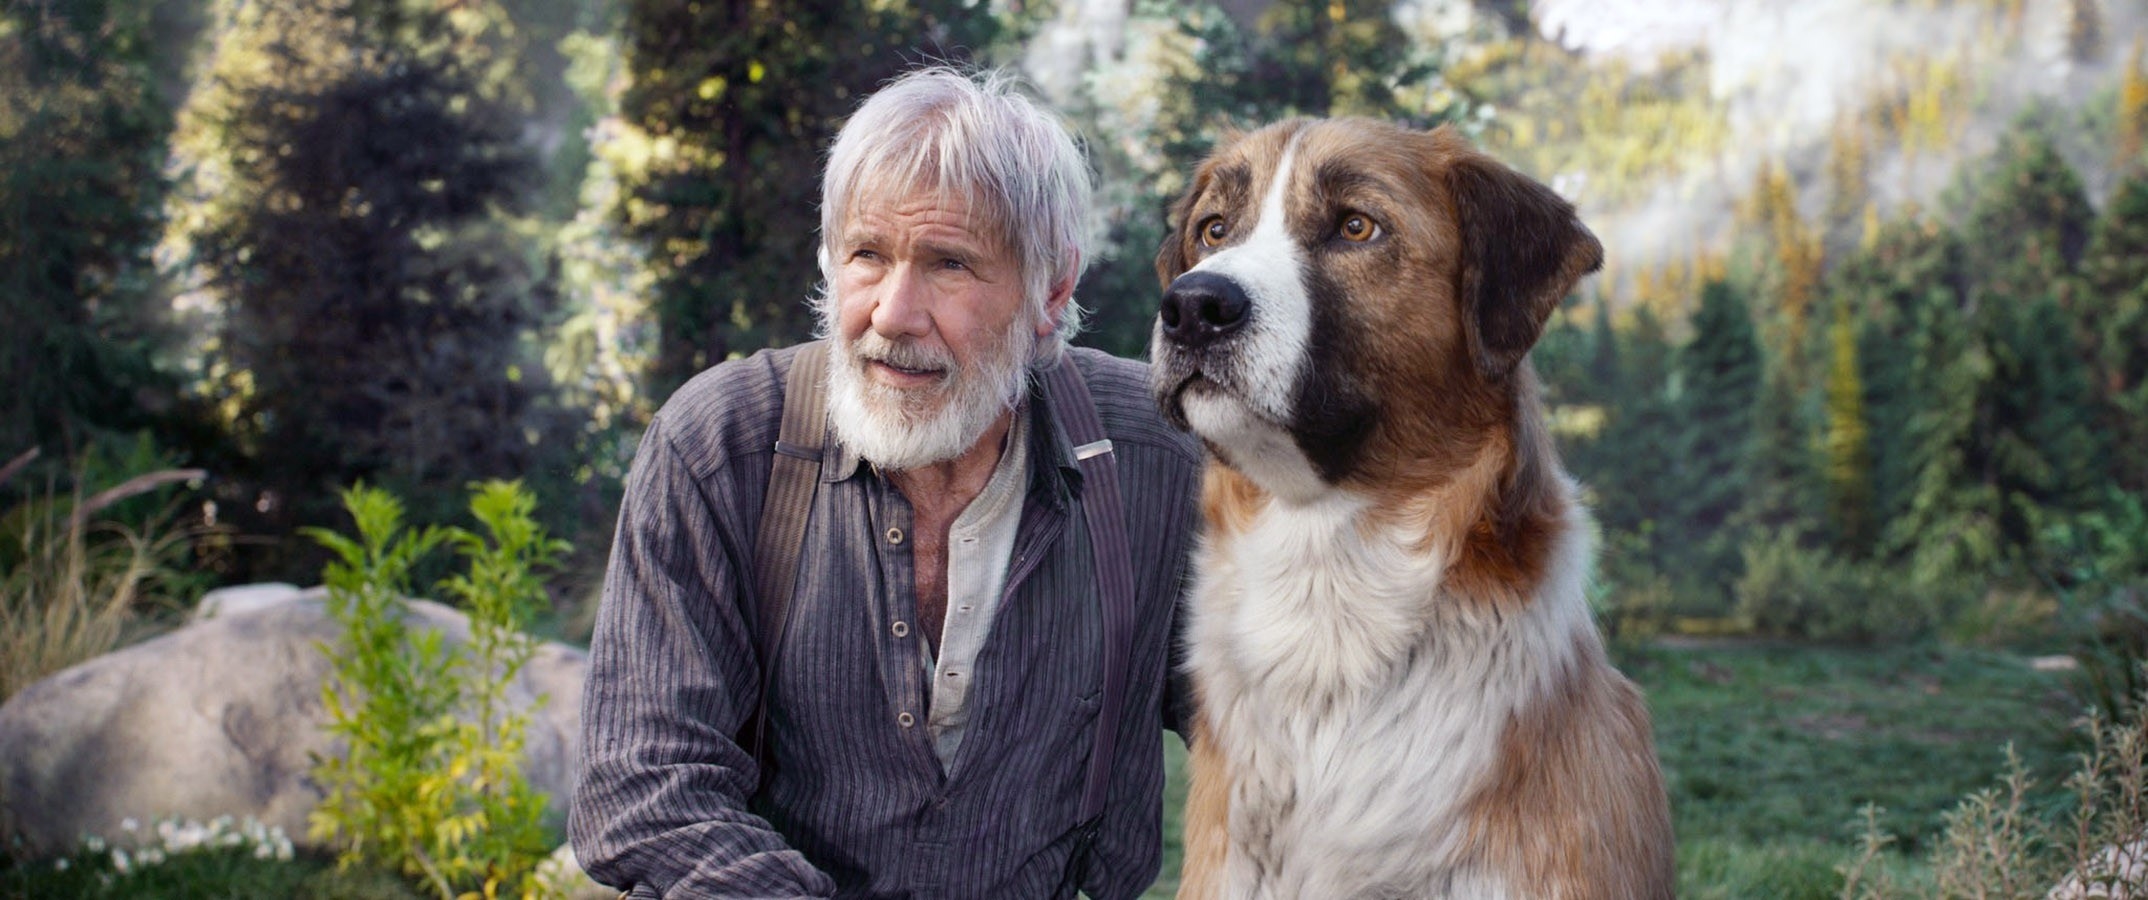 Harrison Ford next to a dog.